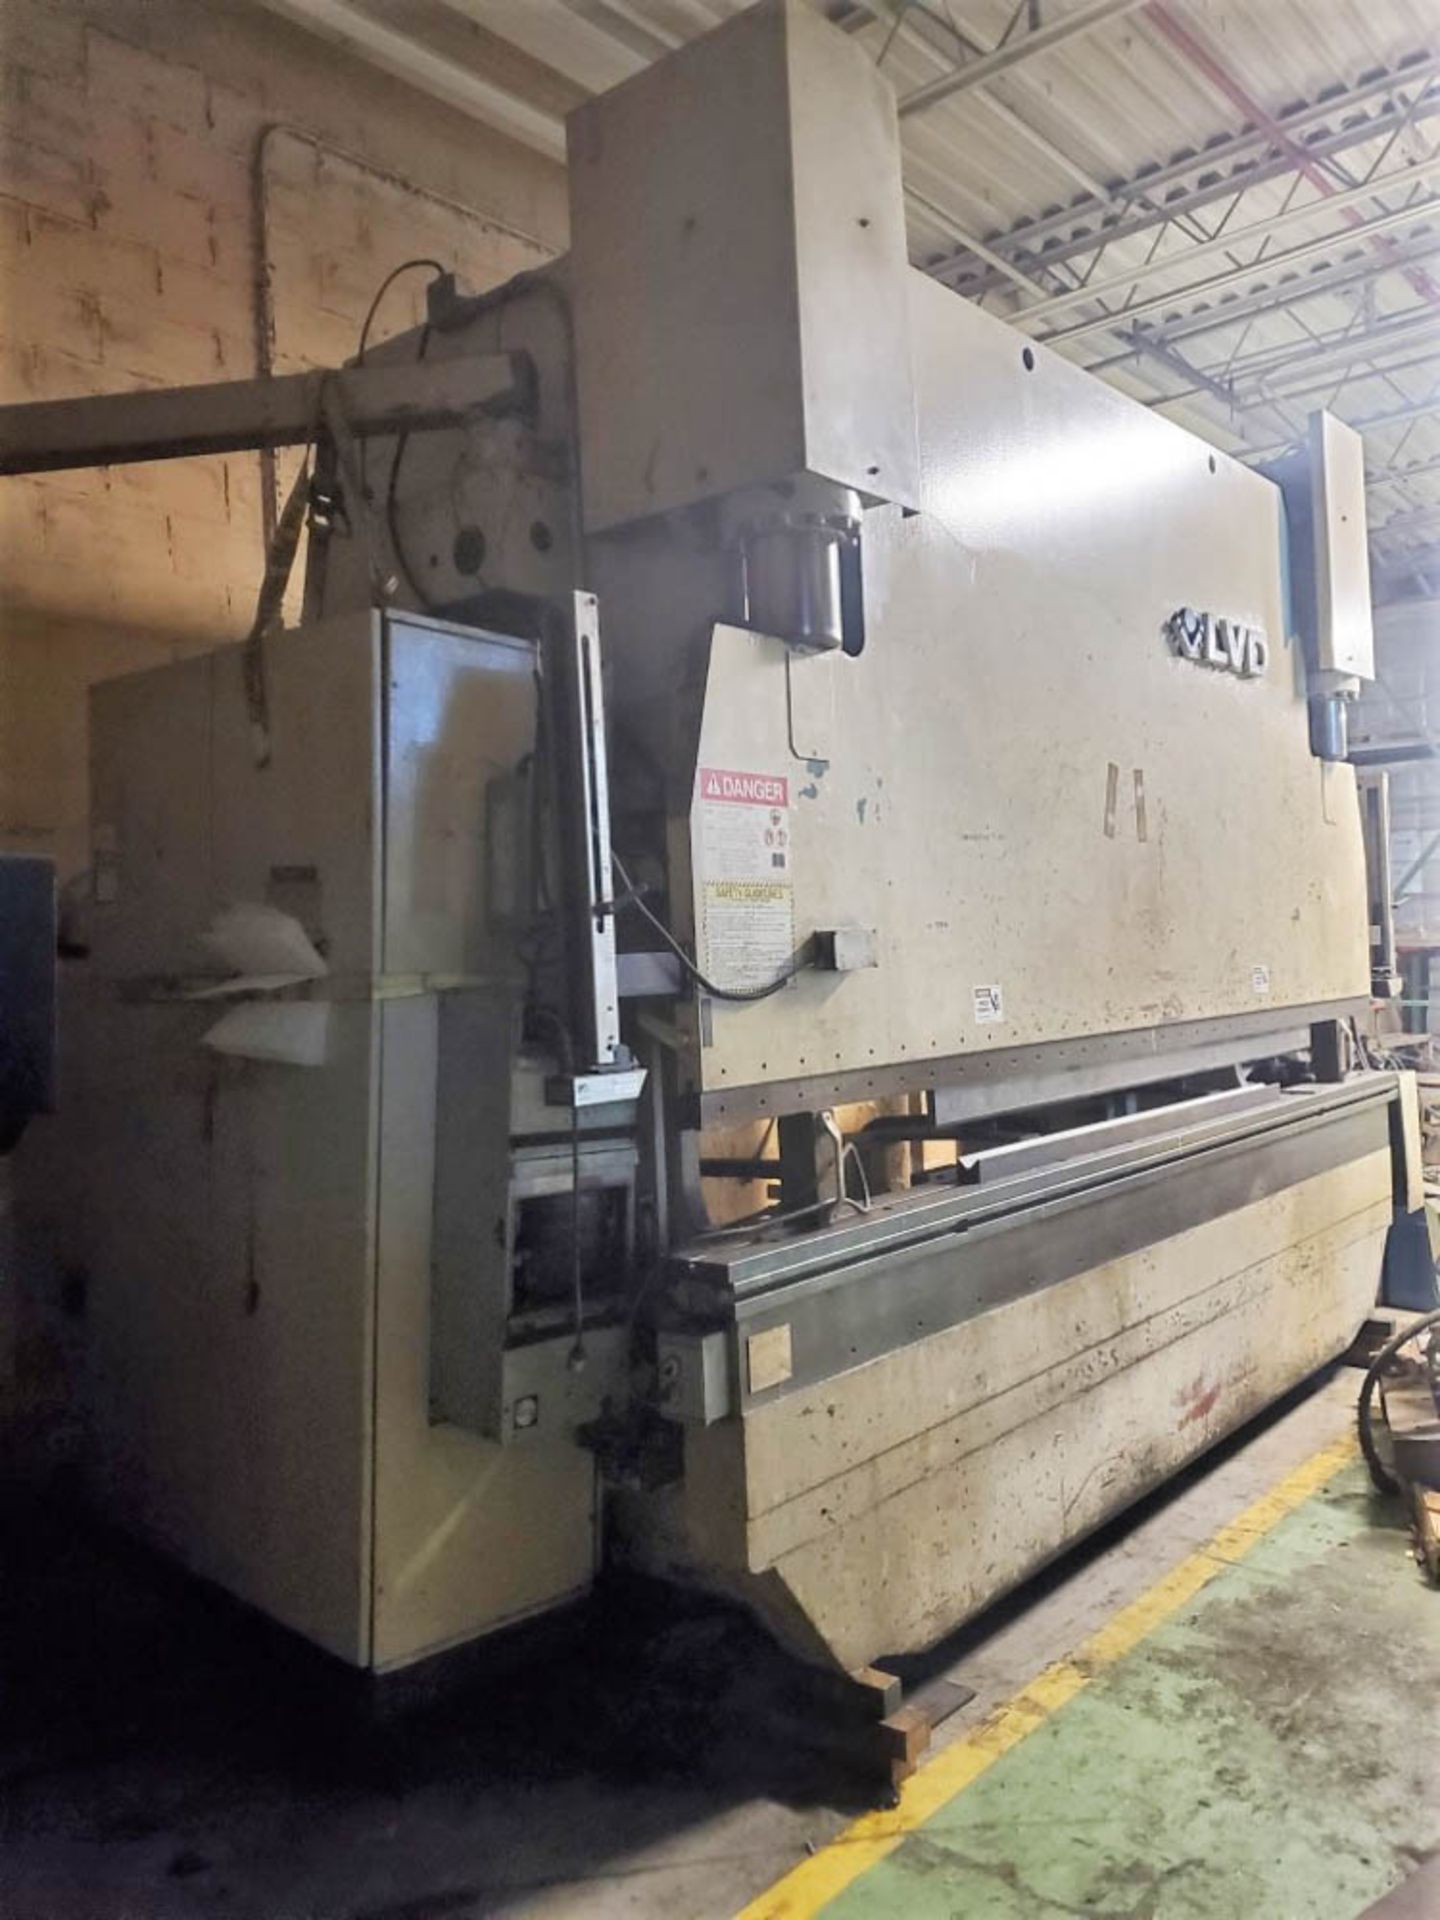 1993 LVD PPEB160-40 160 TON X 161" CNC BRAKE(located in Markle,Indiana), MNC85000, 124" BH -AS IS - Image 3 of 6